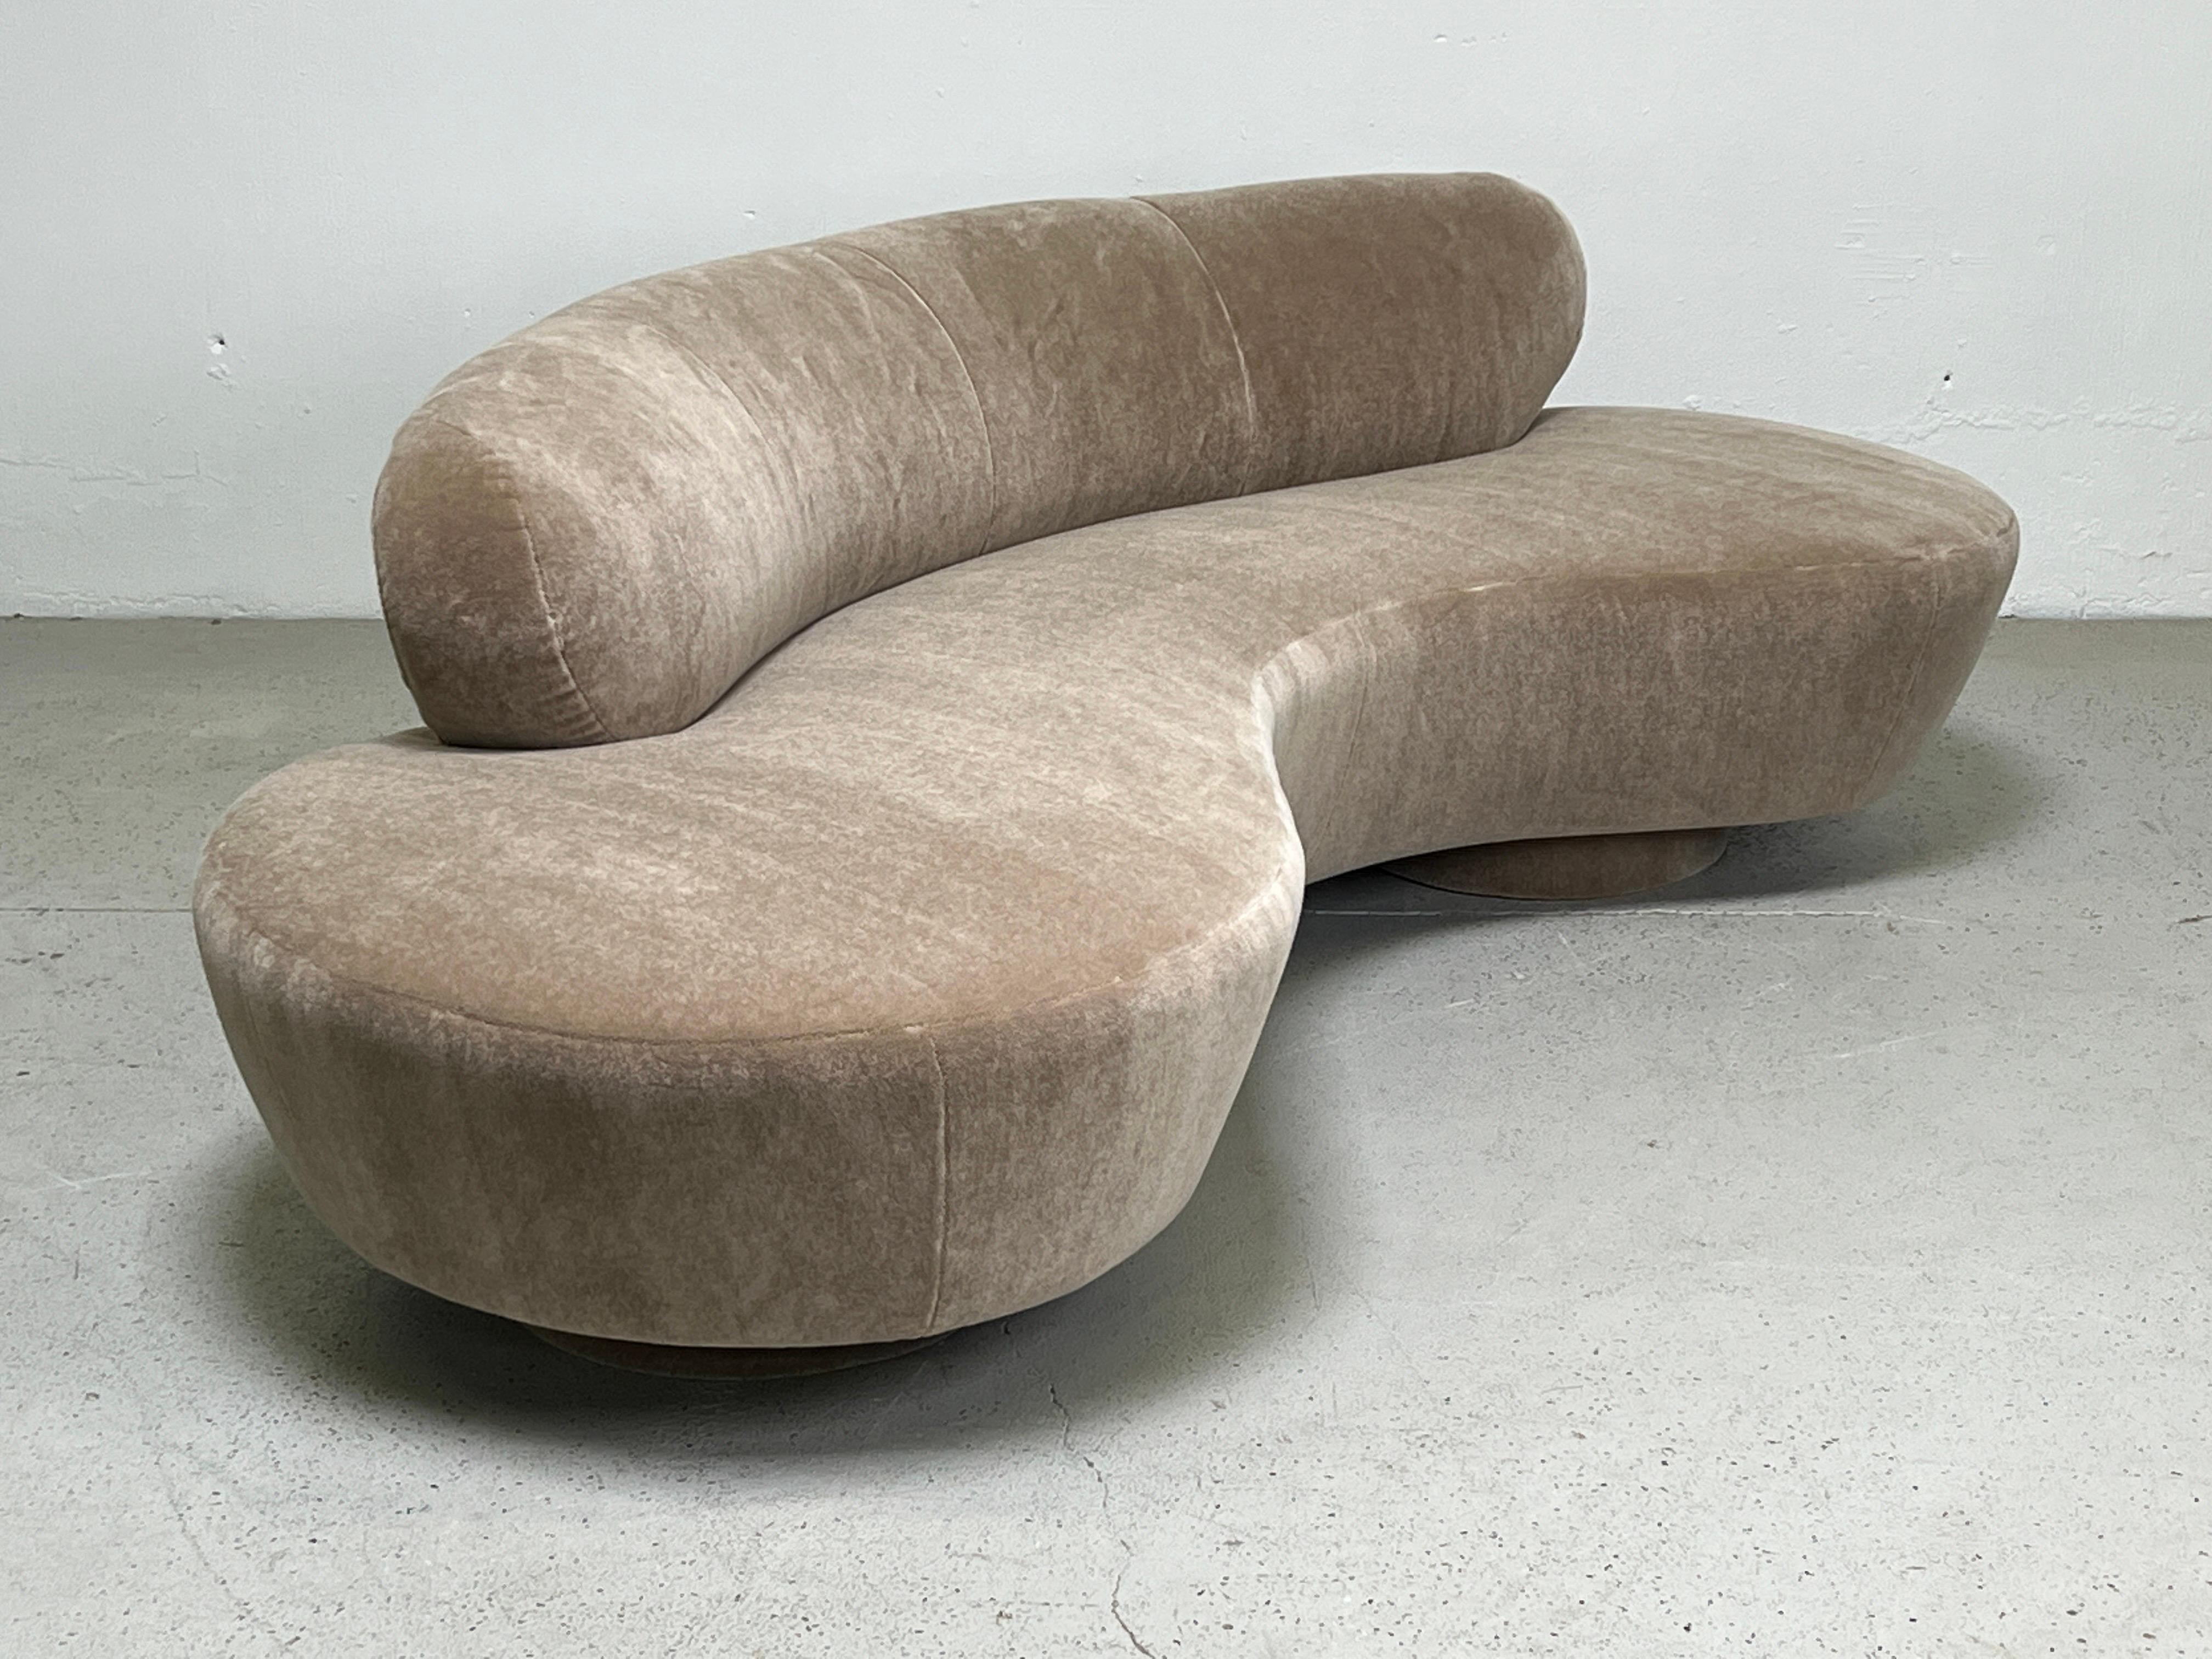 A serpentine / cloud sofa designed by Vladimir Kagan for Directional. Fully restored and upholstered in Holly Hunt / Fuzzy Wuzzy / Honey Bear plush mohair. Matching pair available. 